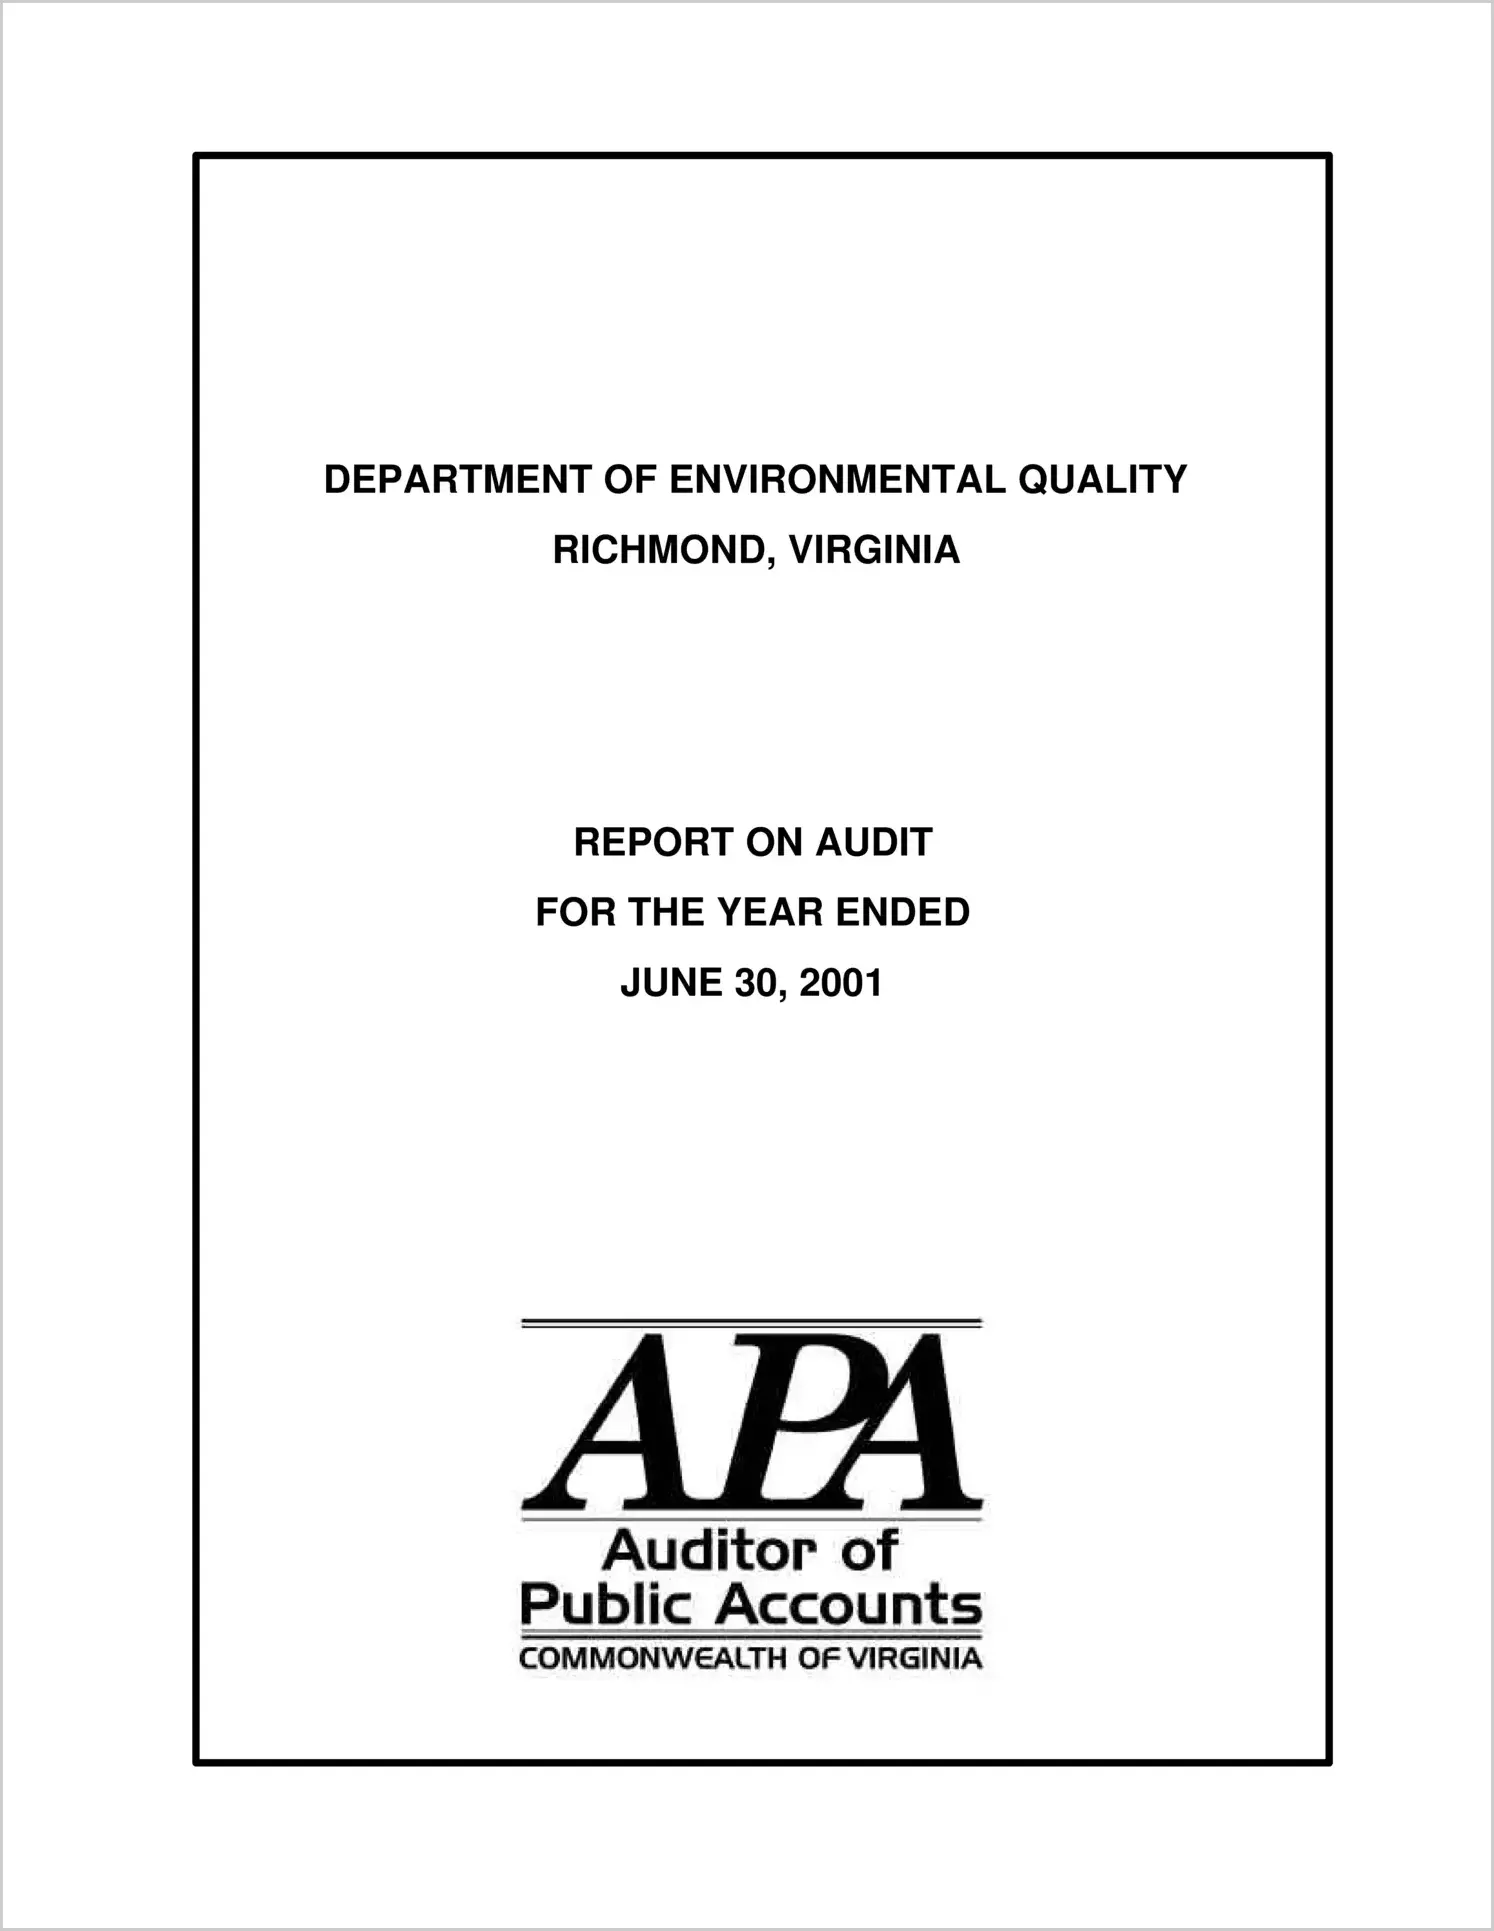 Department of Environmental Quality for the year ended June 30, 2001